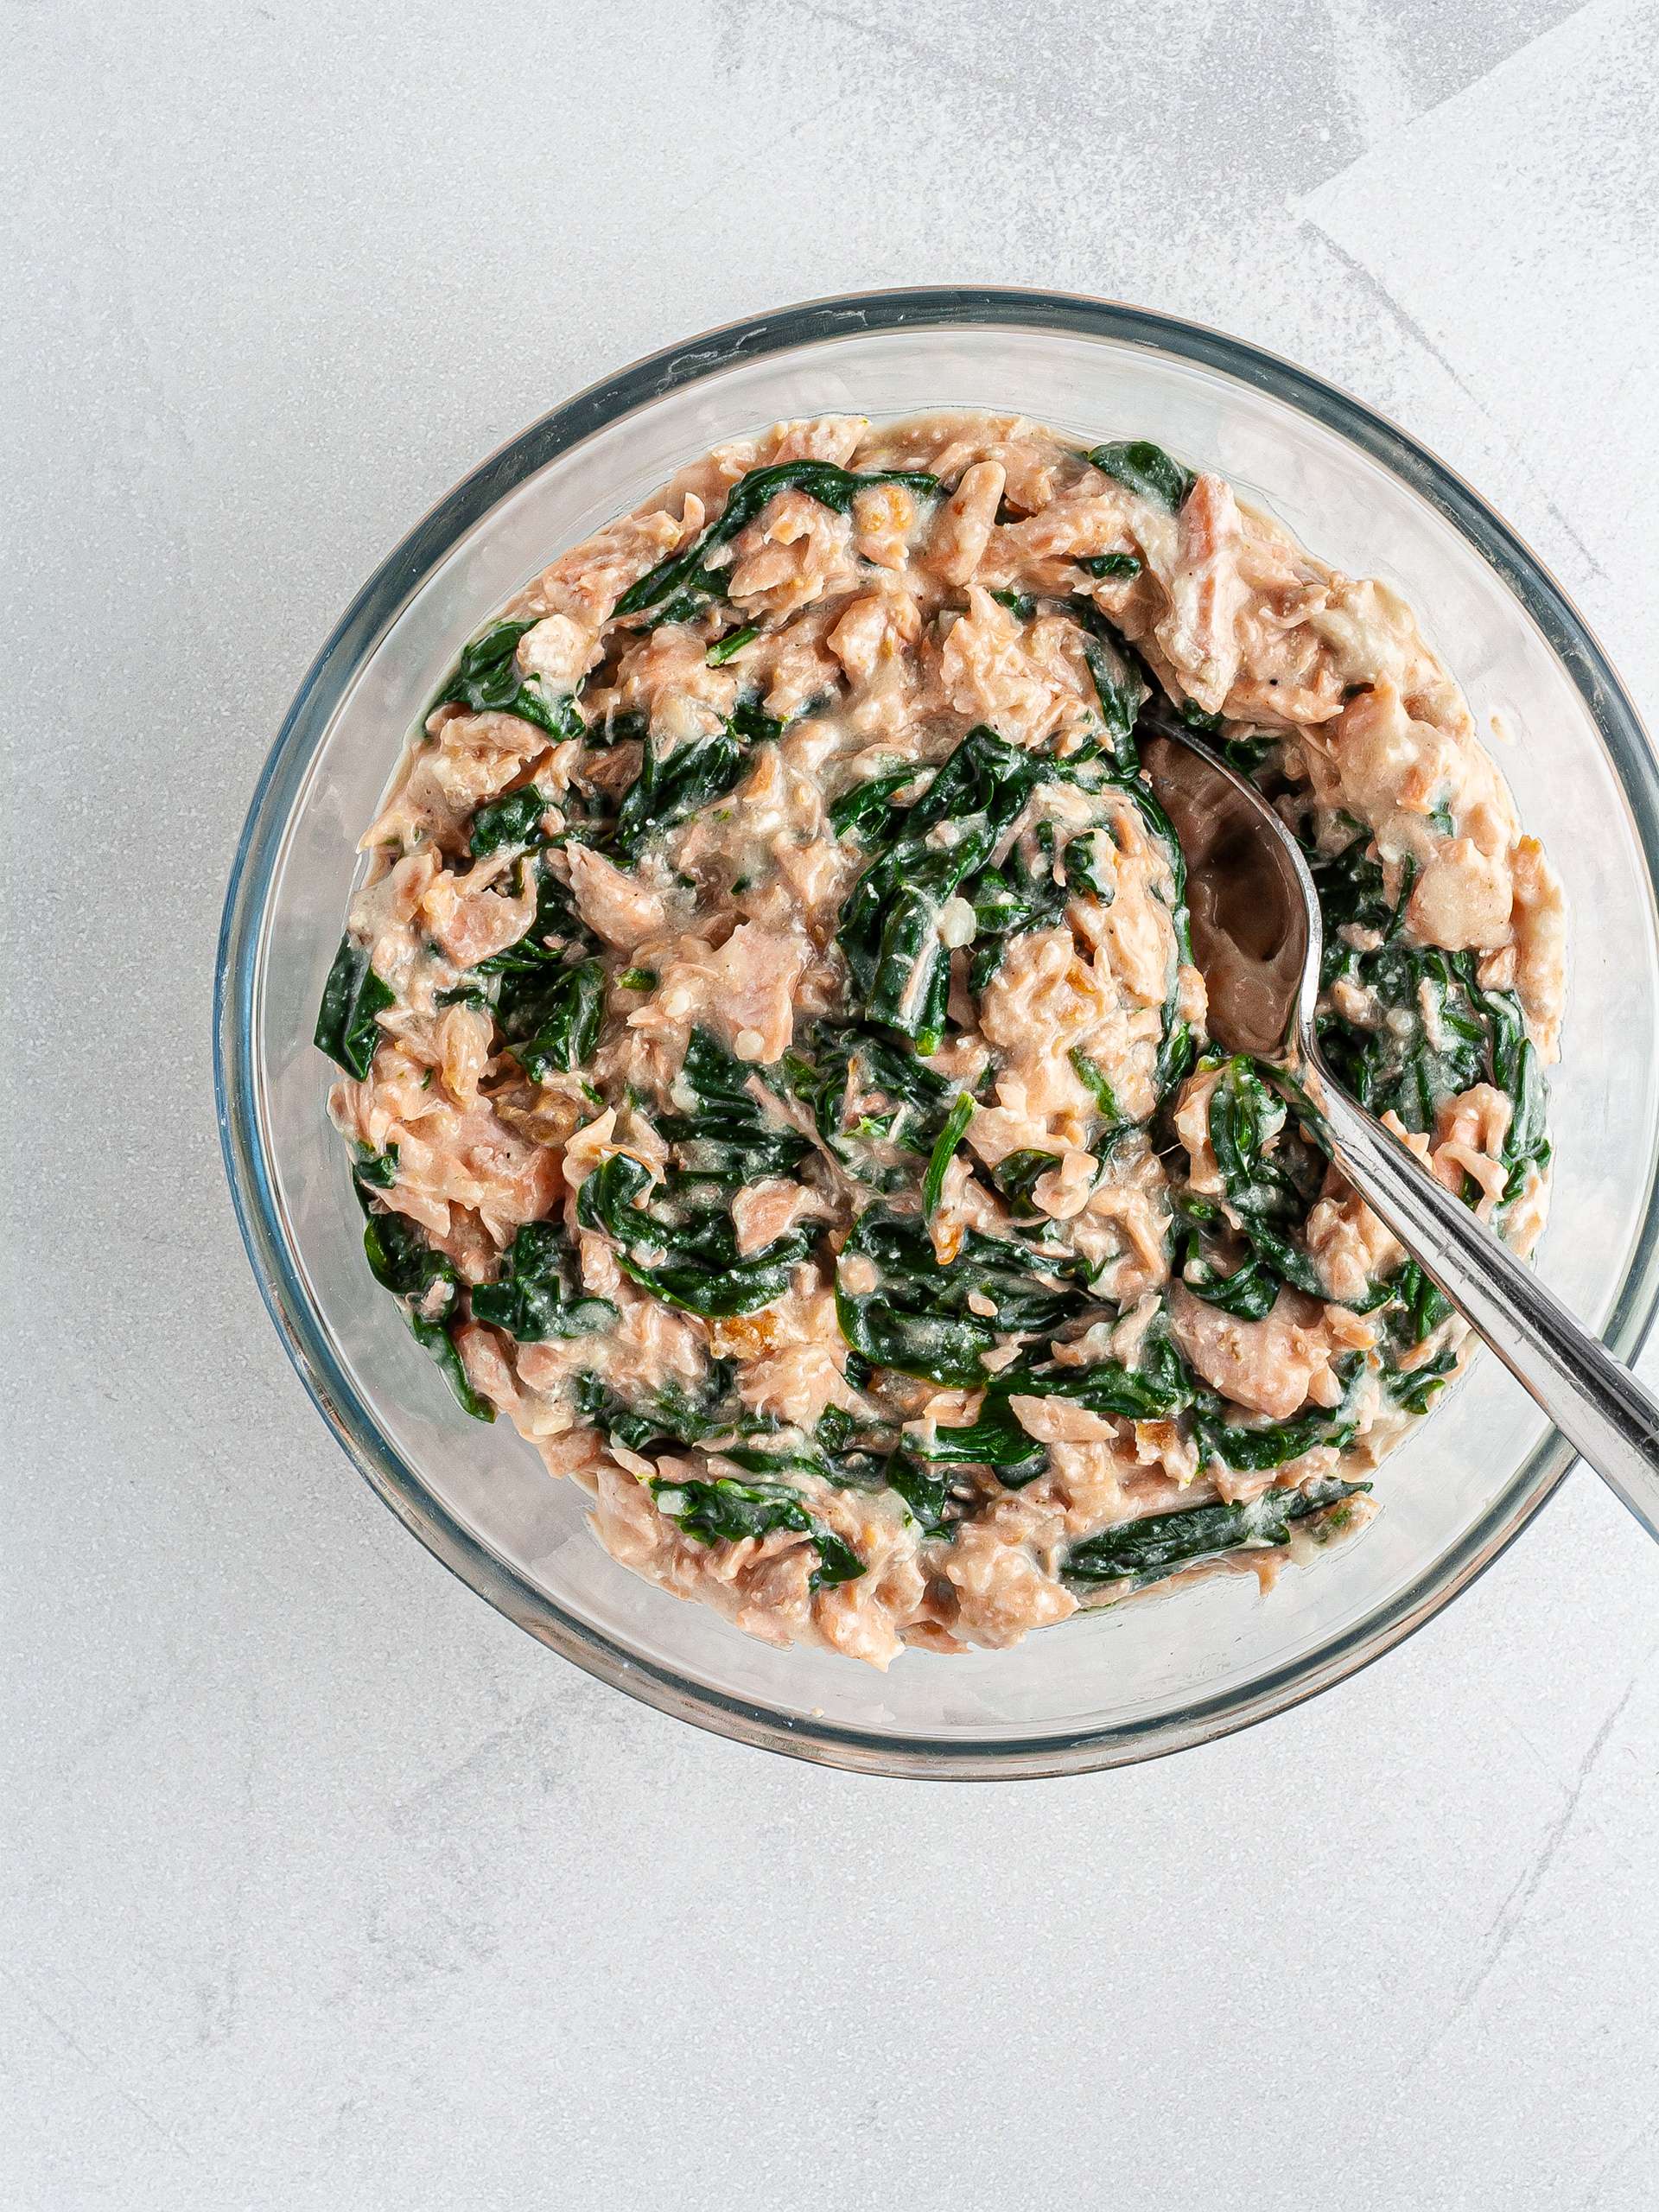 Salmon, spinach, and bechamel sauce mixed in a bowl